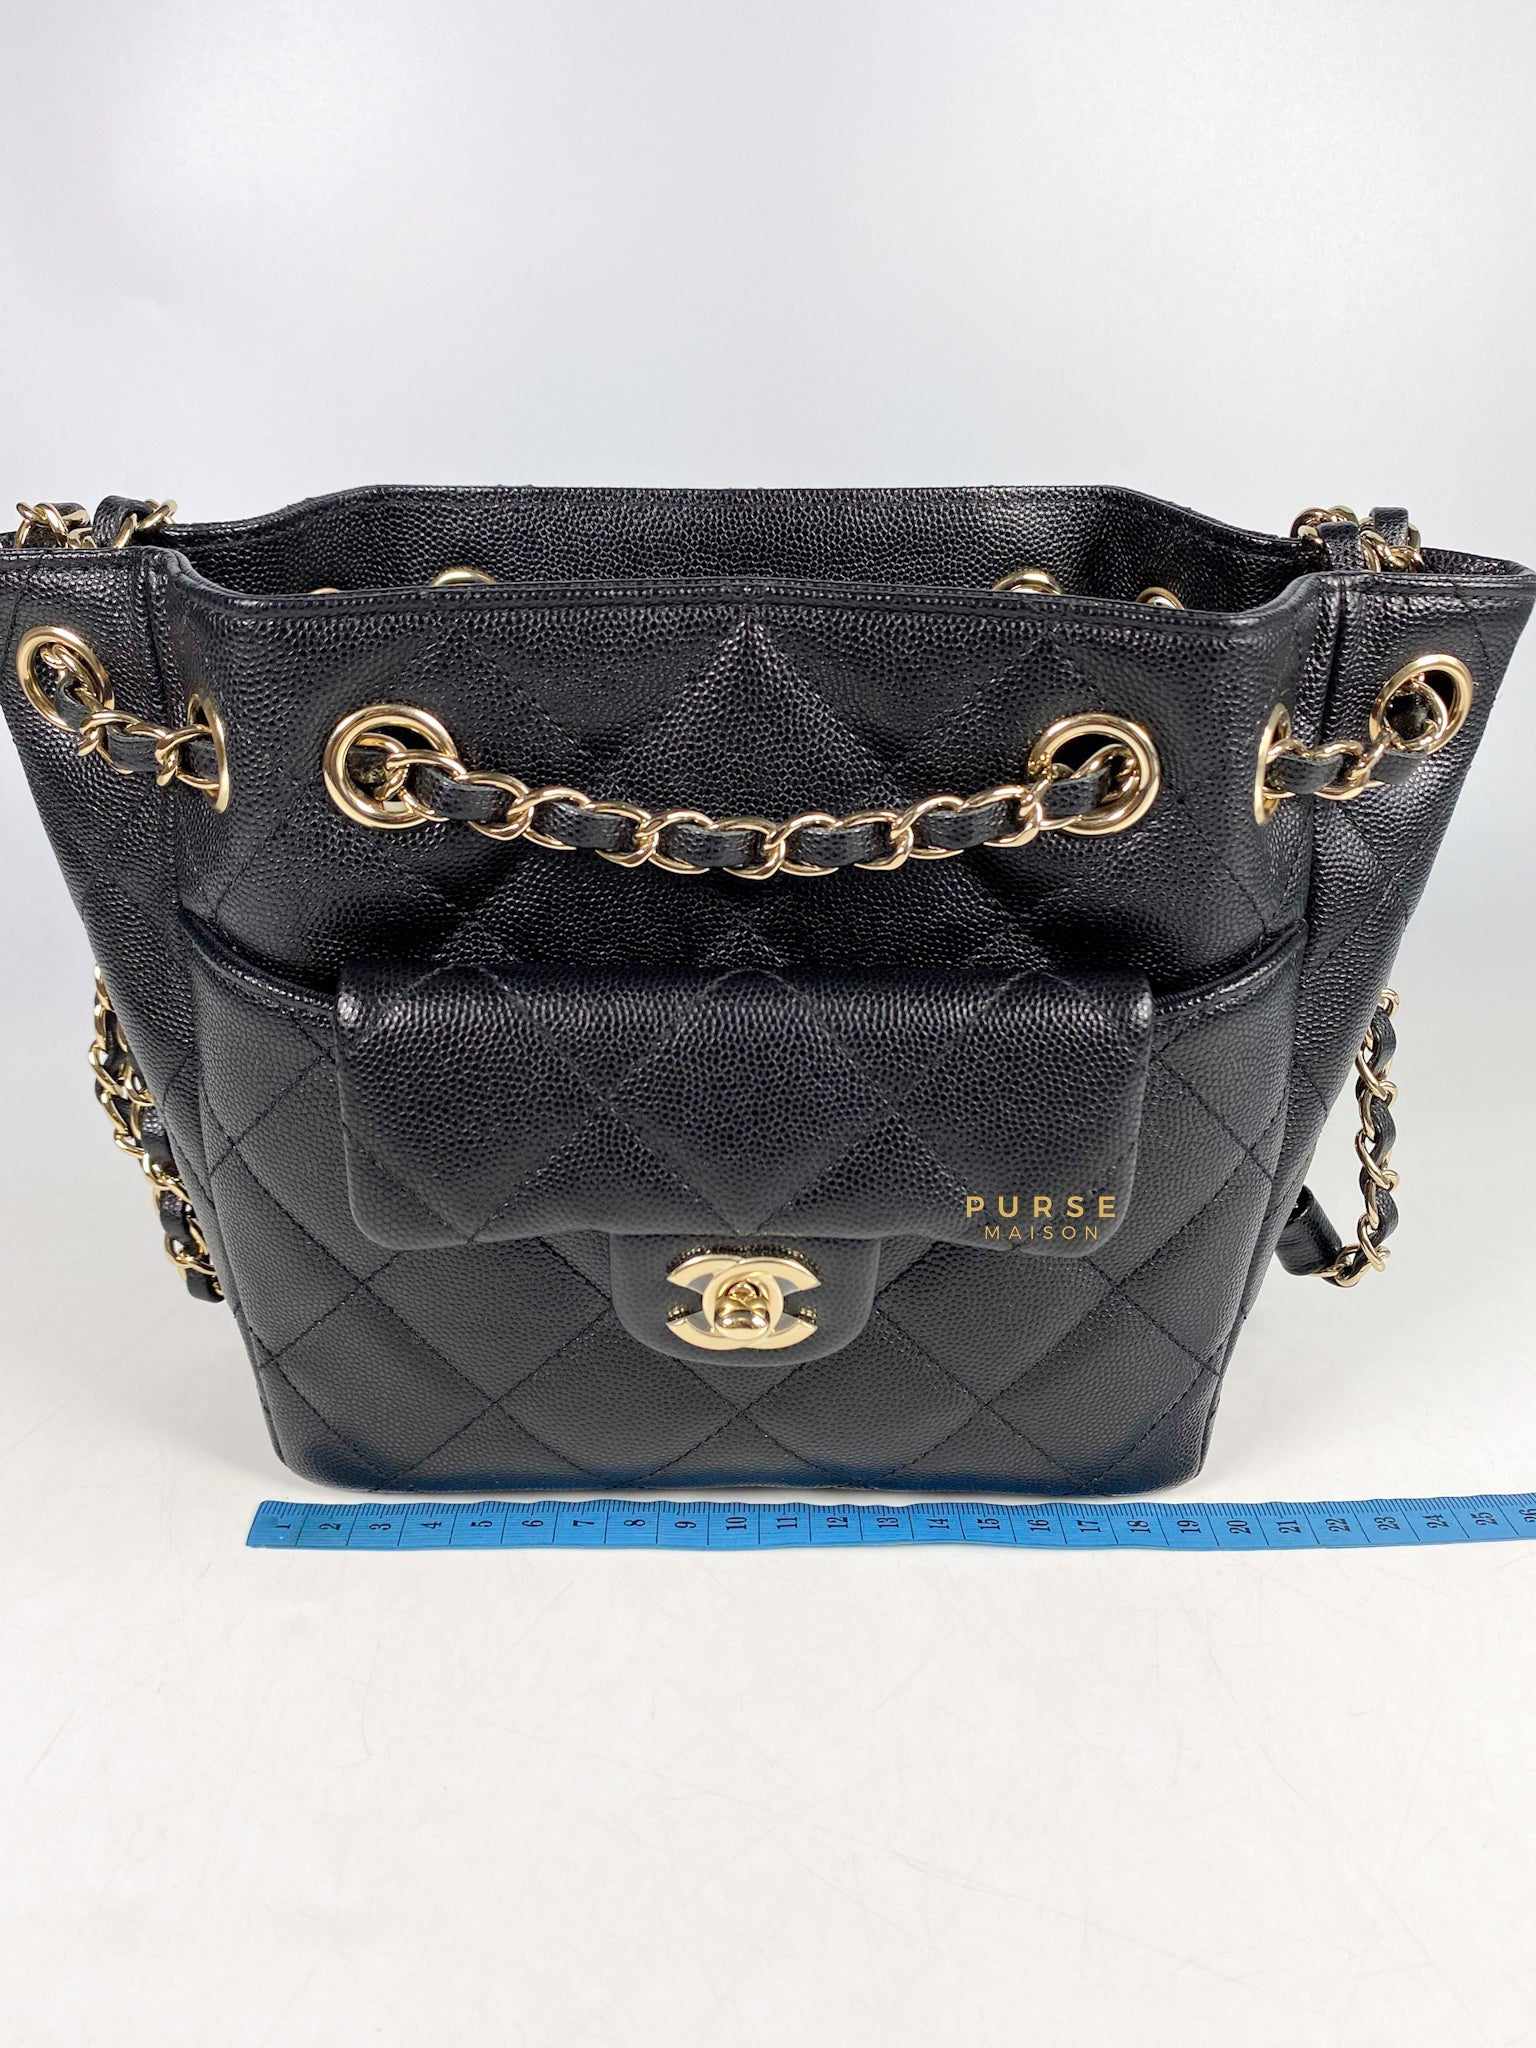 Chanel 2021 Seasonal Small Bucket Bag Black Quilted Caviar Leather Light Gold Hardware (microchip)